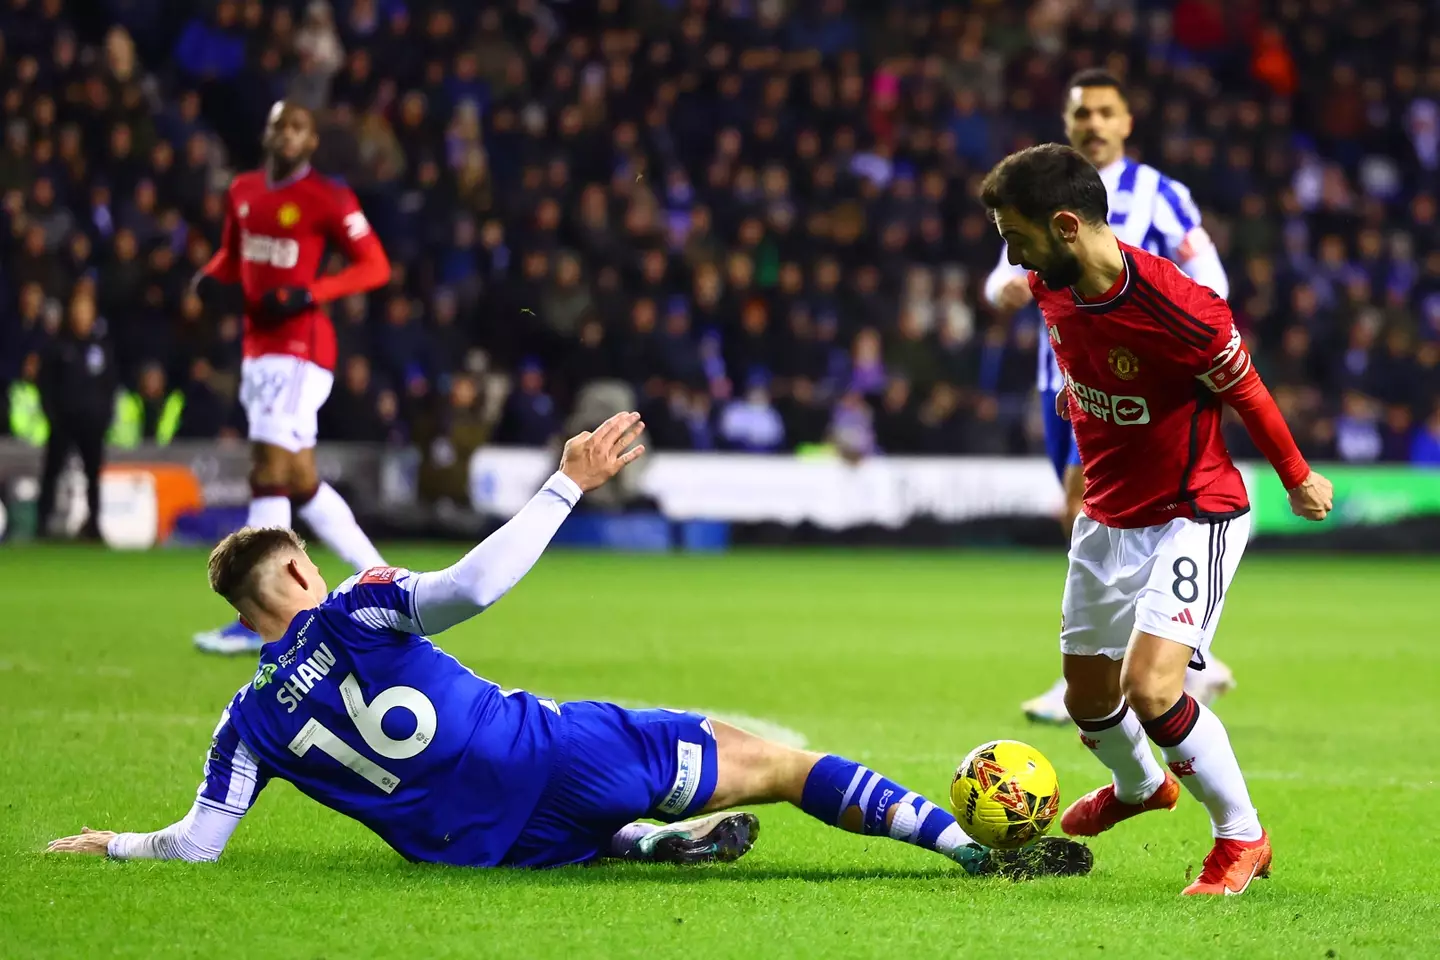 Fernandes went down after feeling a touch from Shaw. (Image